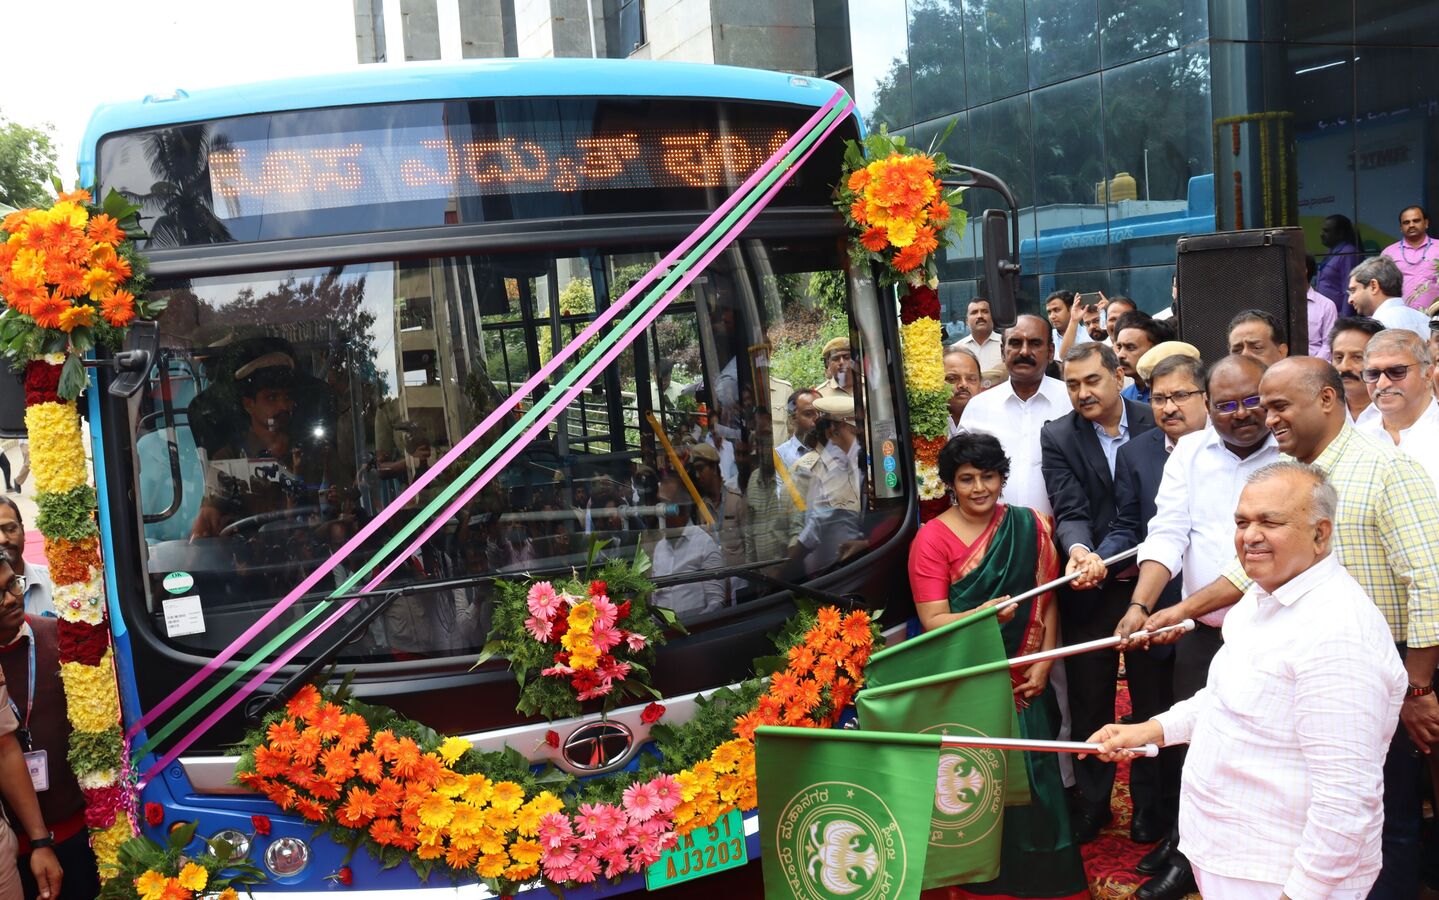 Tata smart e-bus prototype flagged off in Bengaluru. Here's what's special